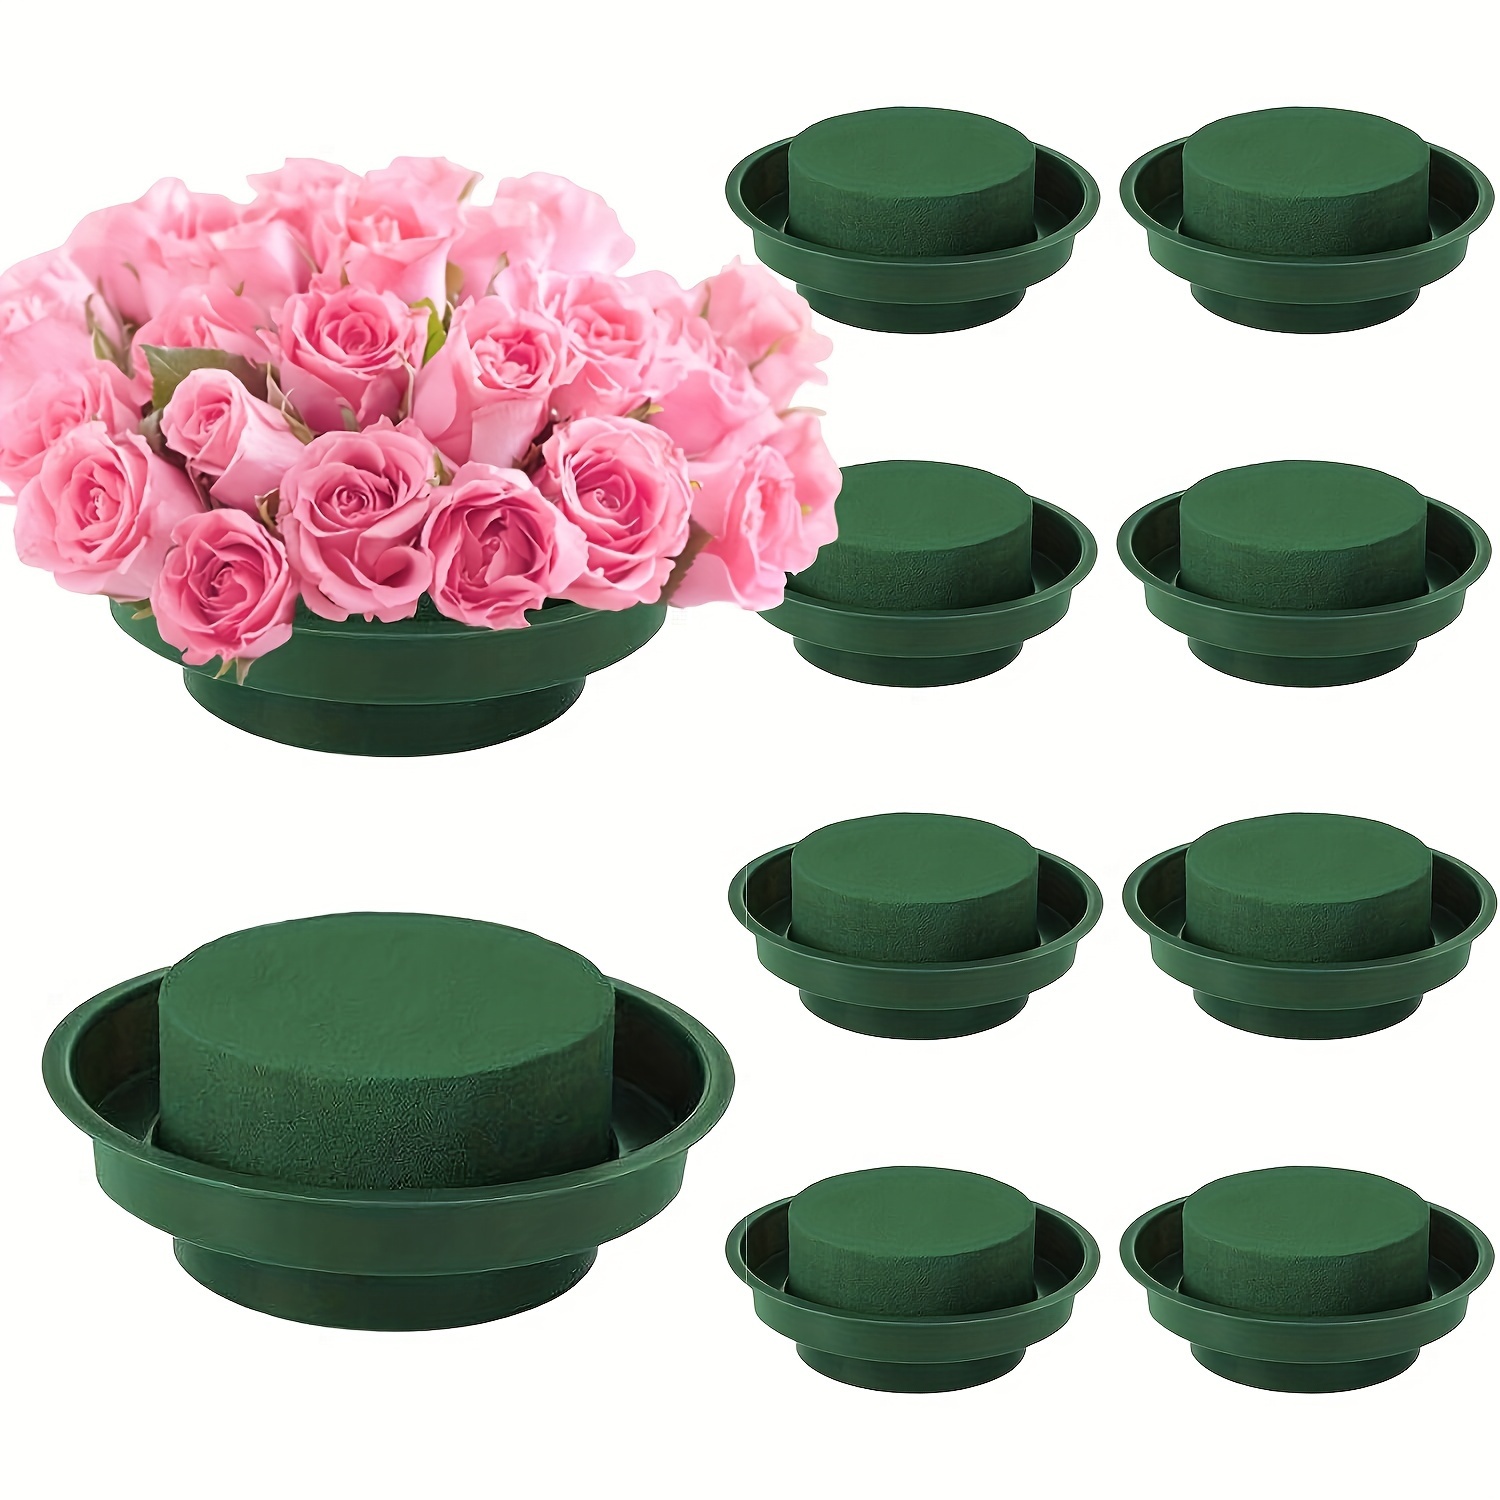 

10-pack Green Floral Foam With Plastic Holder, 4.72" Diameter - Ideal For Diy Flower Arrangements, Wedding & Party Decorations Floral Foam Blocks For Artificial Flowers Floral Foam Round